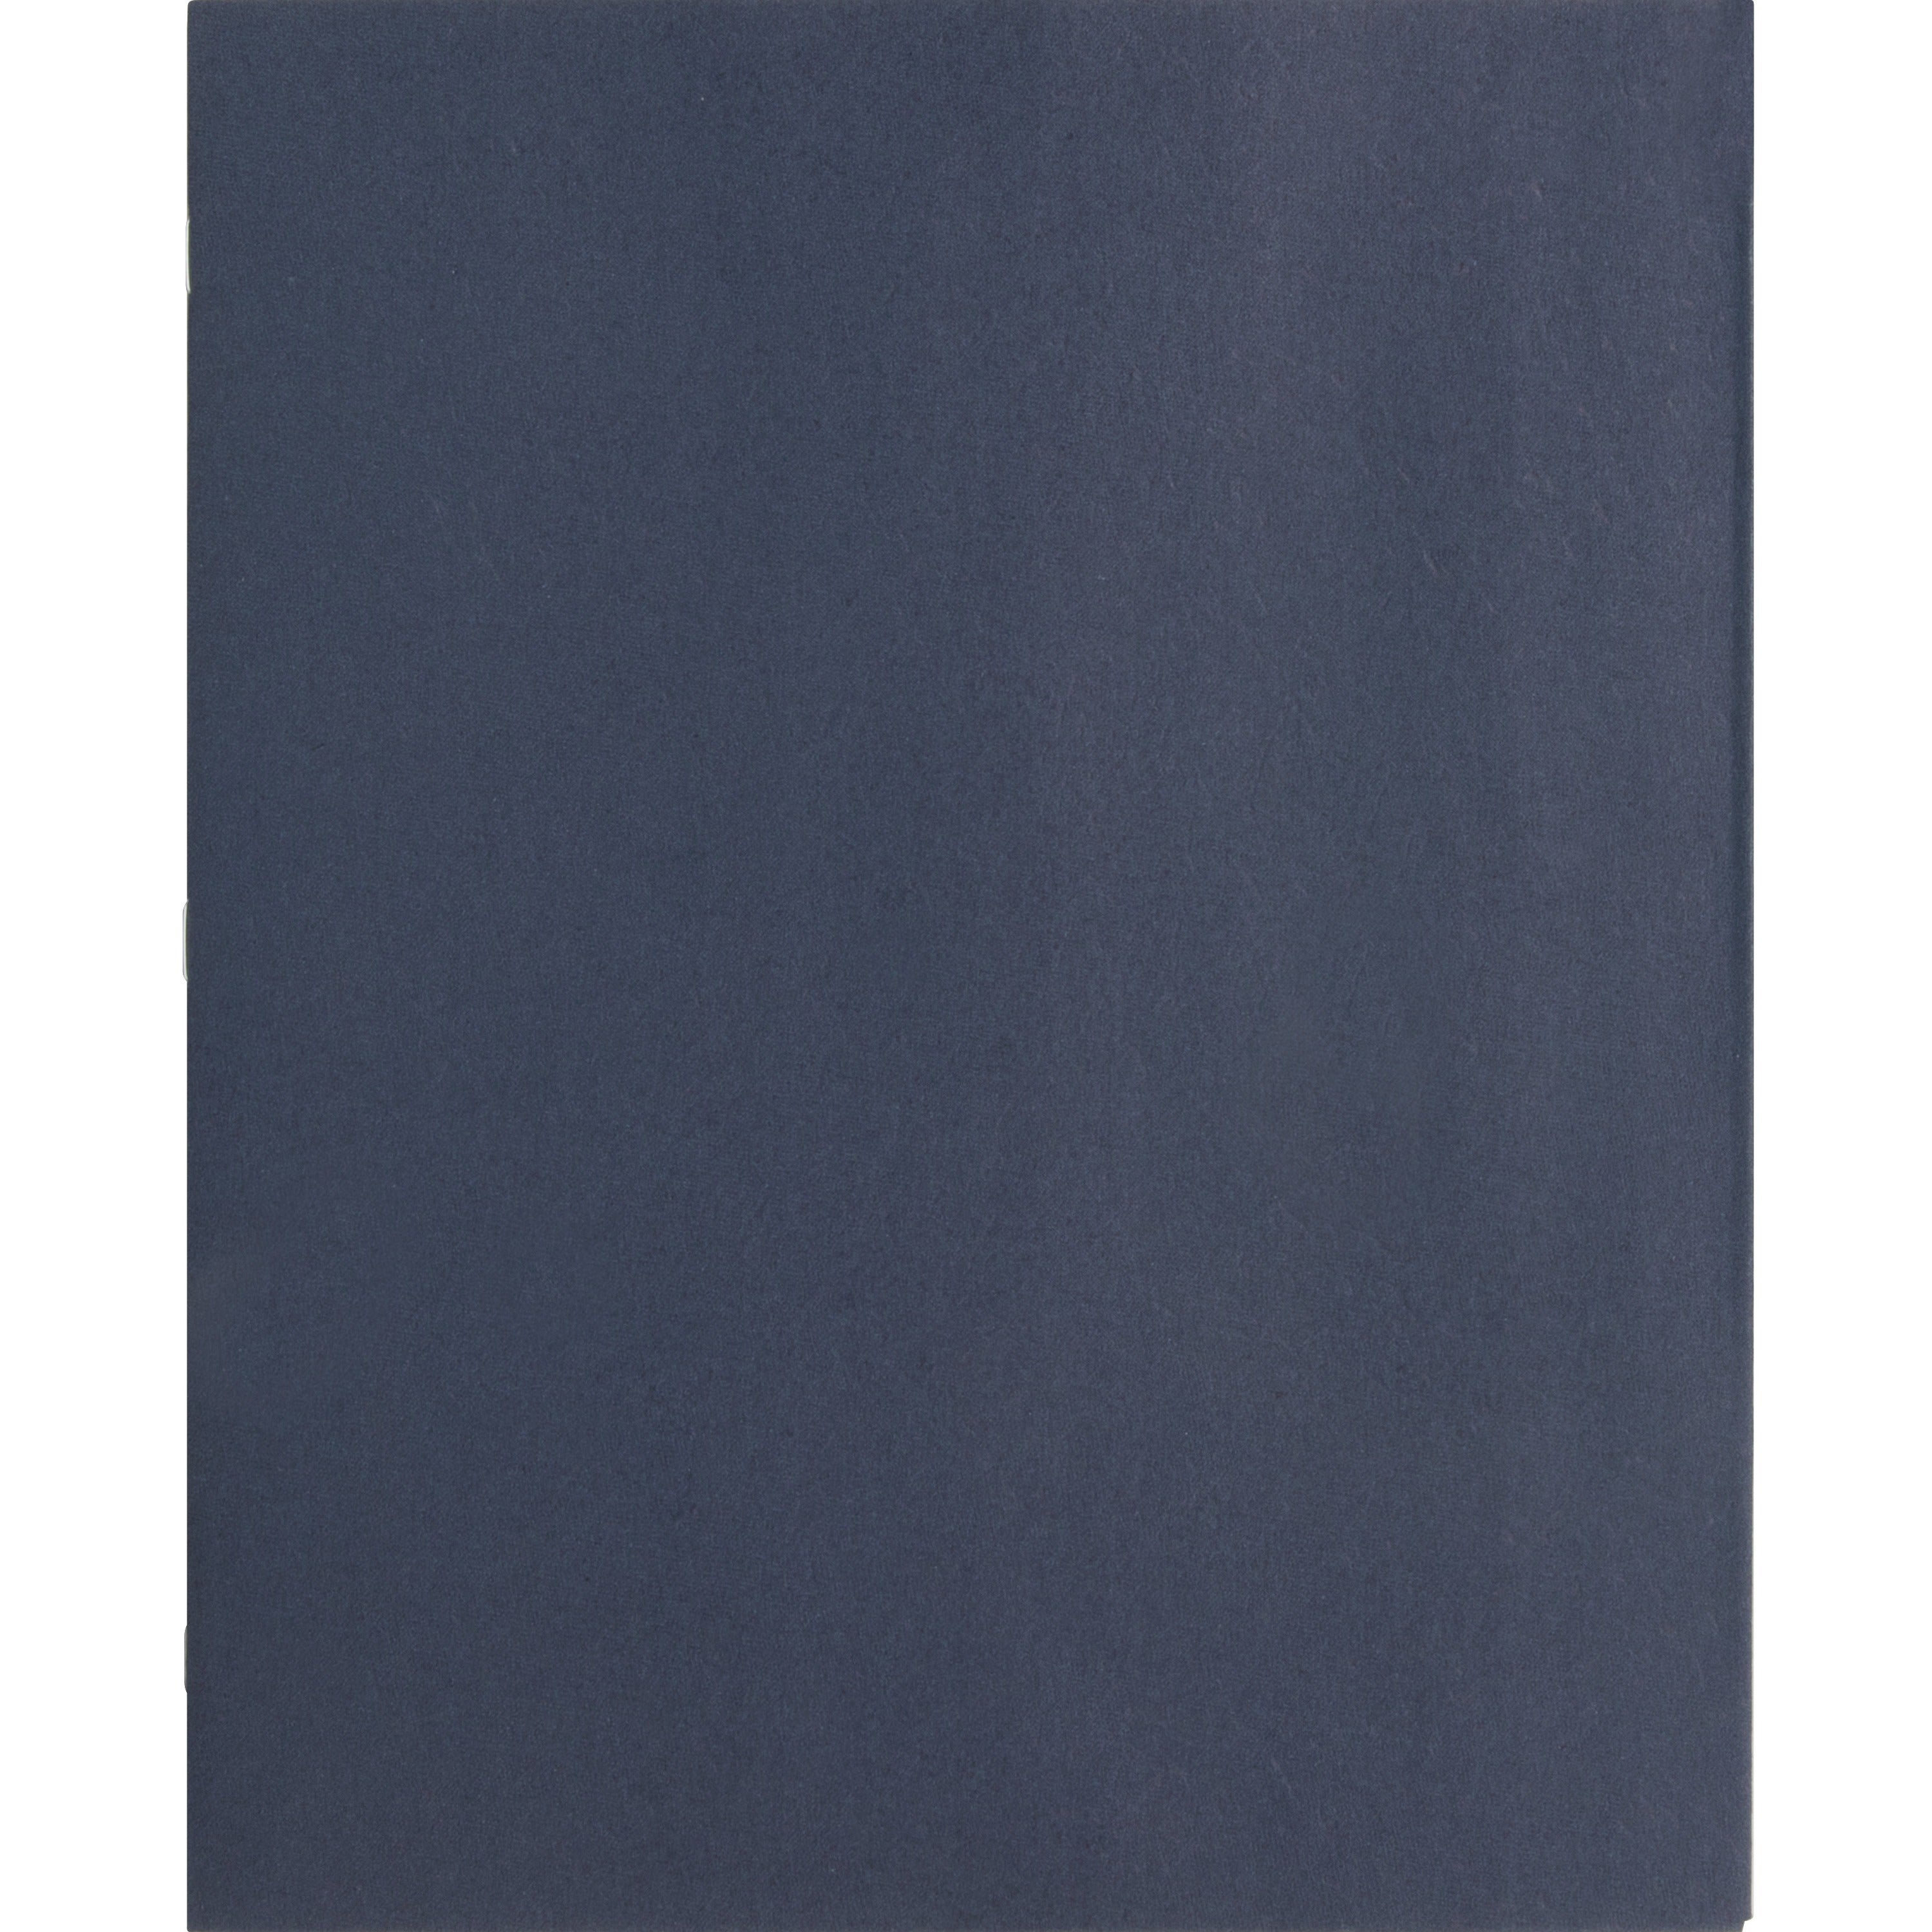 Business Source Letter Recycled Pocket Folder - 8 1/2" x 11" - 100 Sheet Capacity - 3 x Prong Fastener(s) - 1/2" Fastener Capacity - 2 Inside Front & Back Pocket(s) - Leatherette - Dark Blue - 35% Recycled - 25 / Box - 